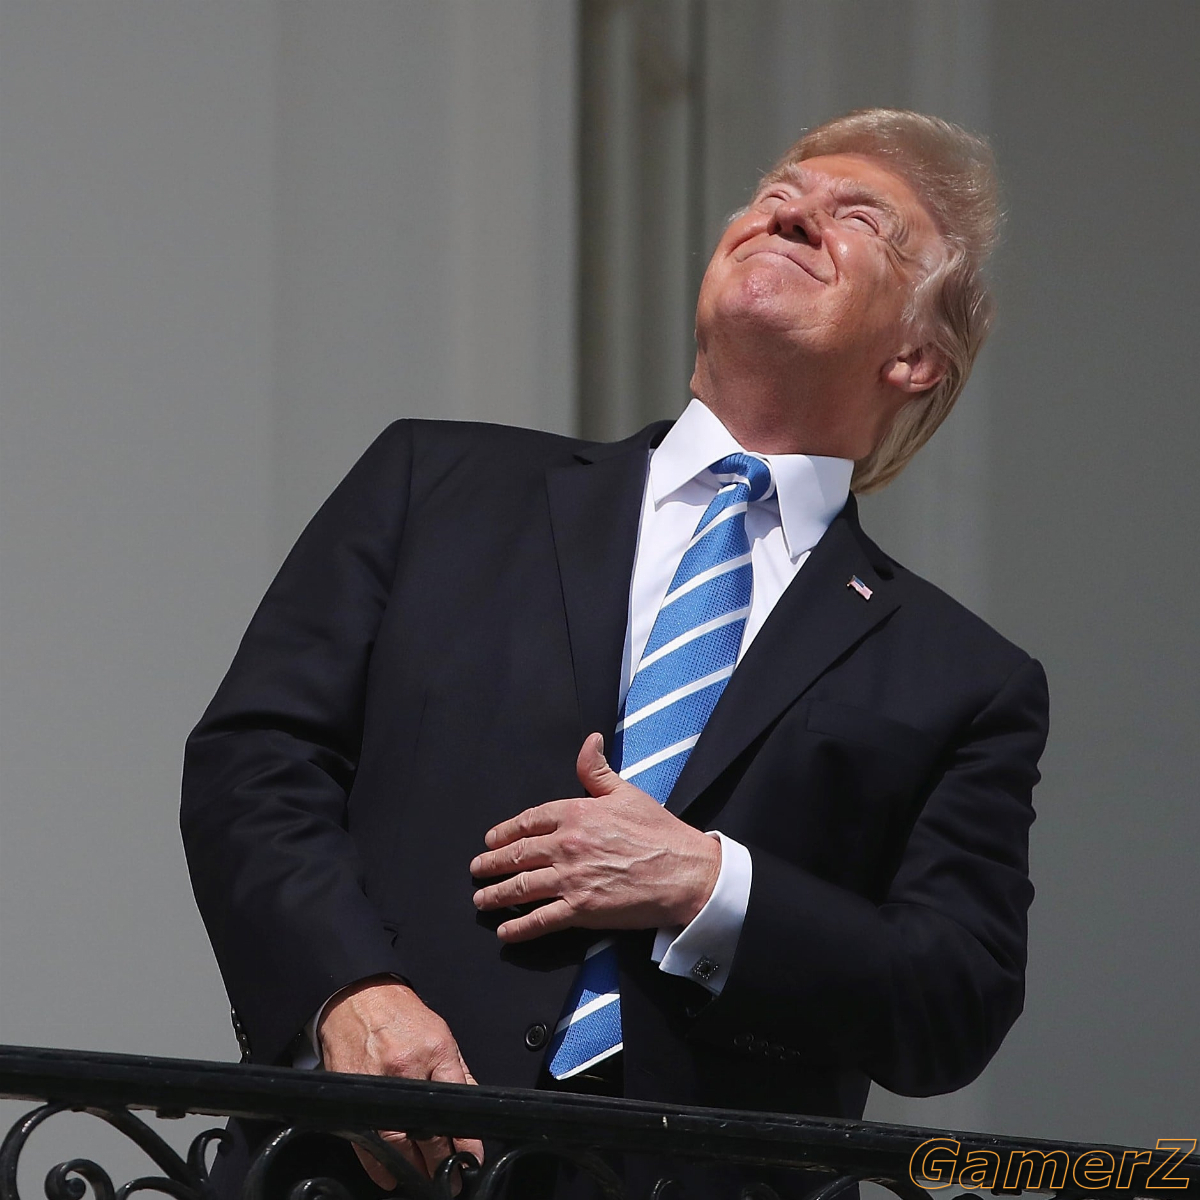 ump-Looks-Sun-Without-Glasses-During-Solar-Eclipse.jpg